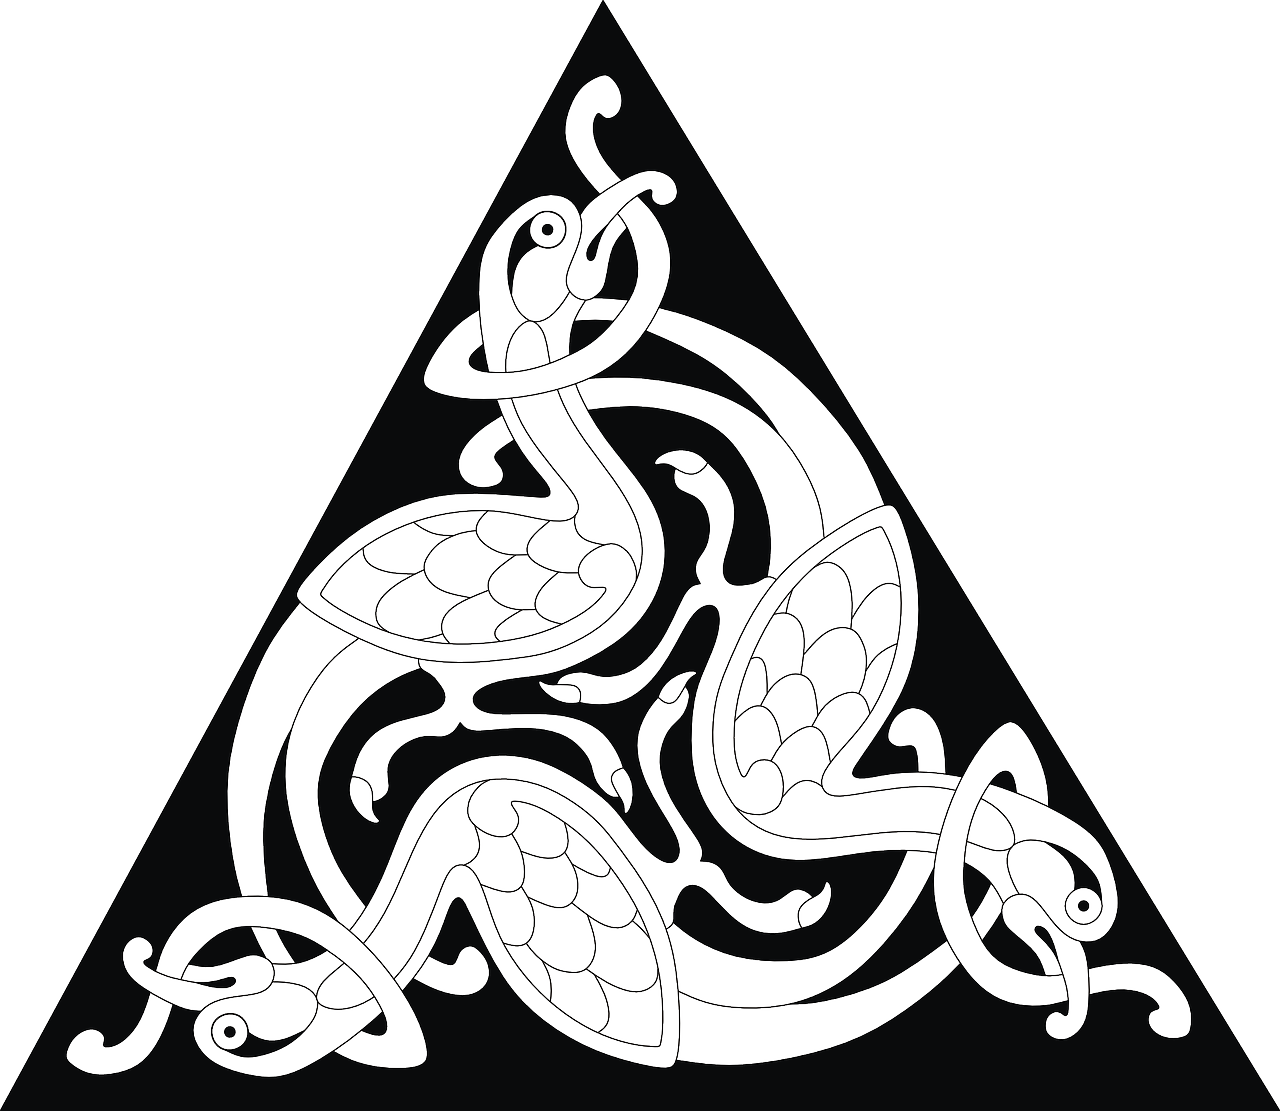 celtic,triangle,ornament,free vector graphics,free pictures, free photos, free images, royalty free, free illustrations, public domain